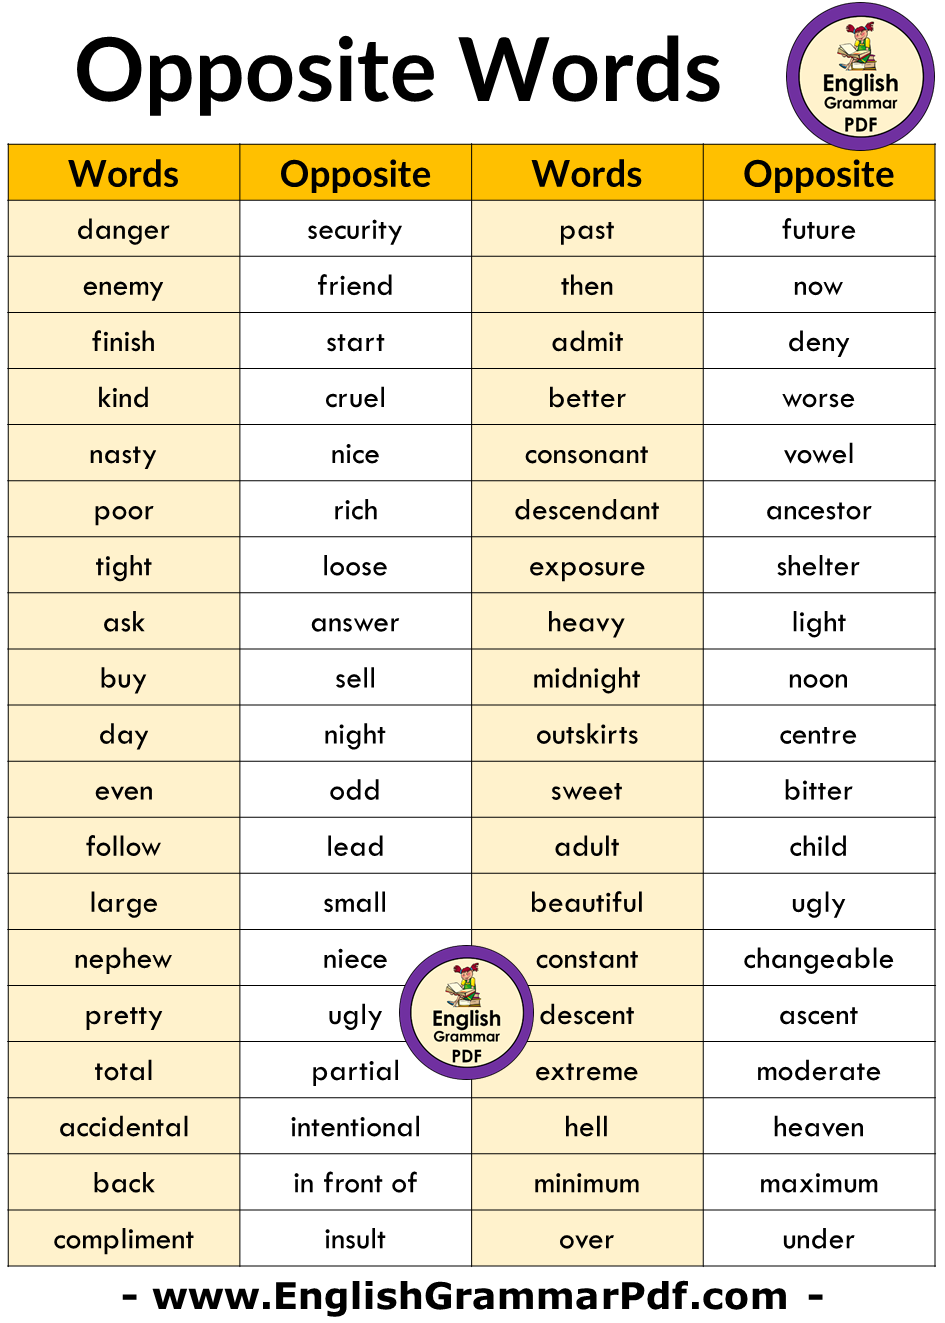 500 Opposite Words List in English